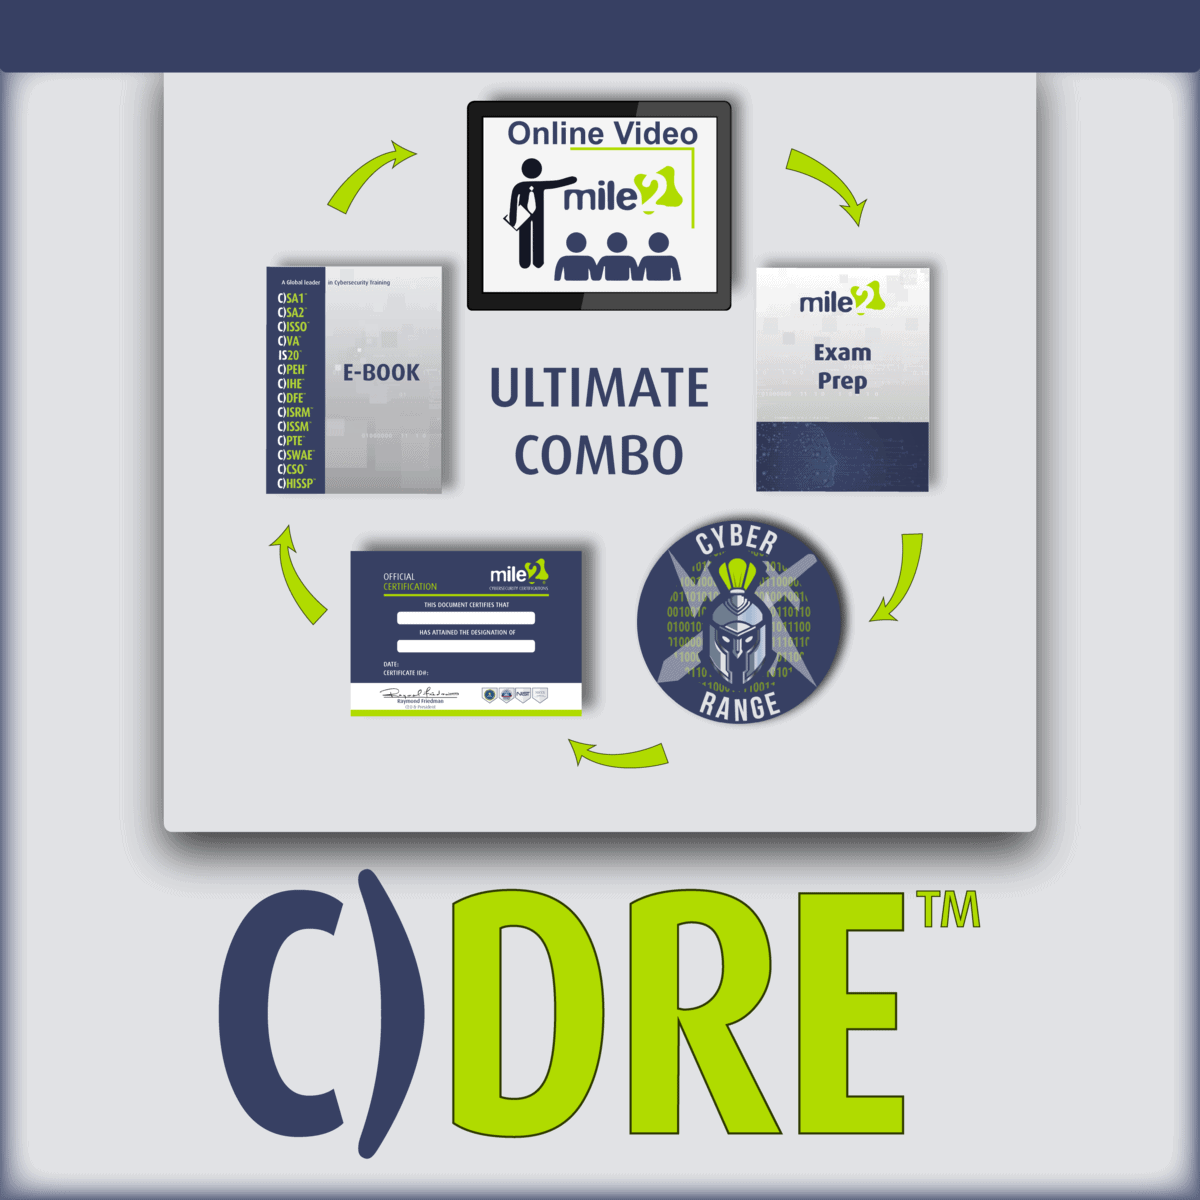 C)DRE Disaster Recovery Engineer ultimate combo